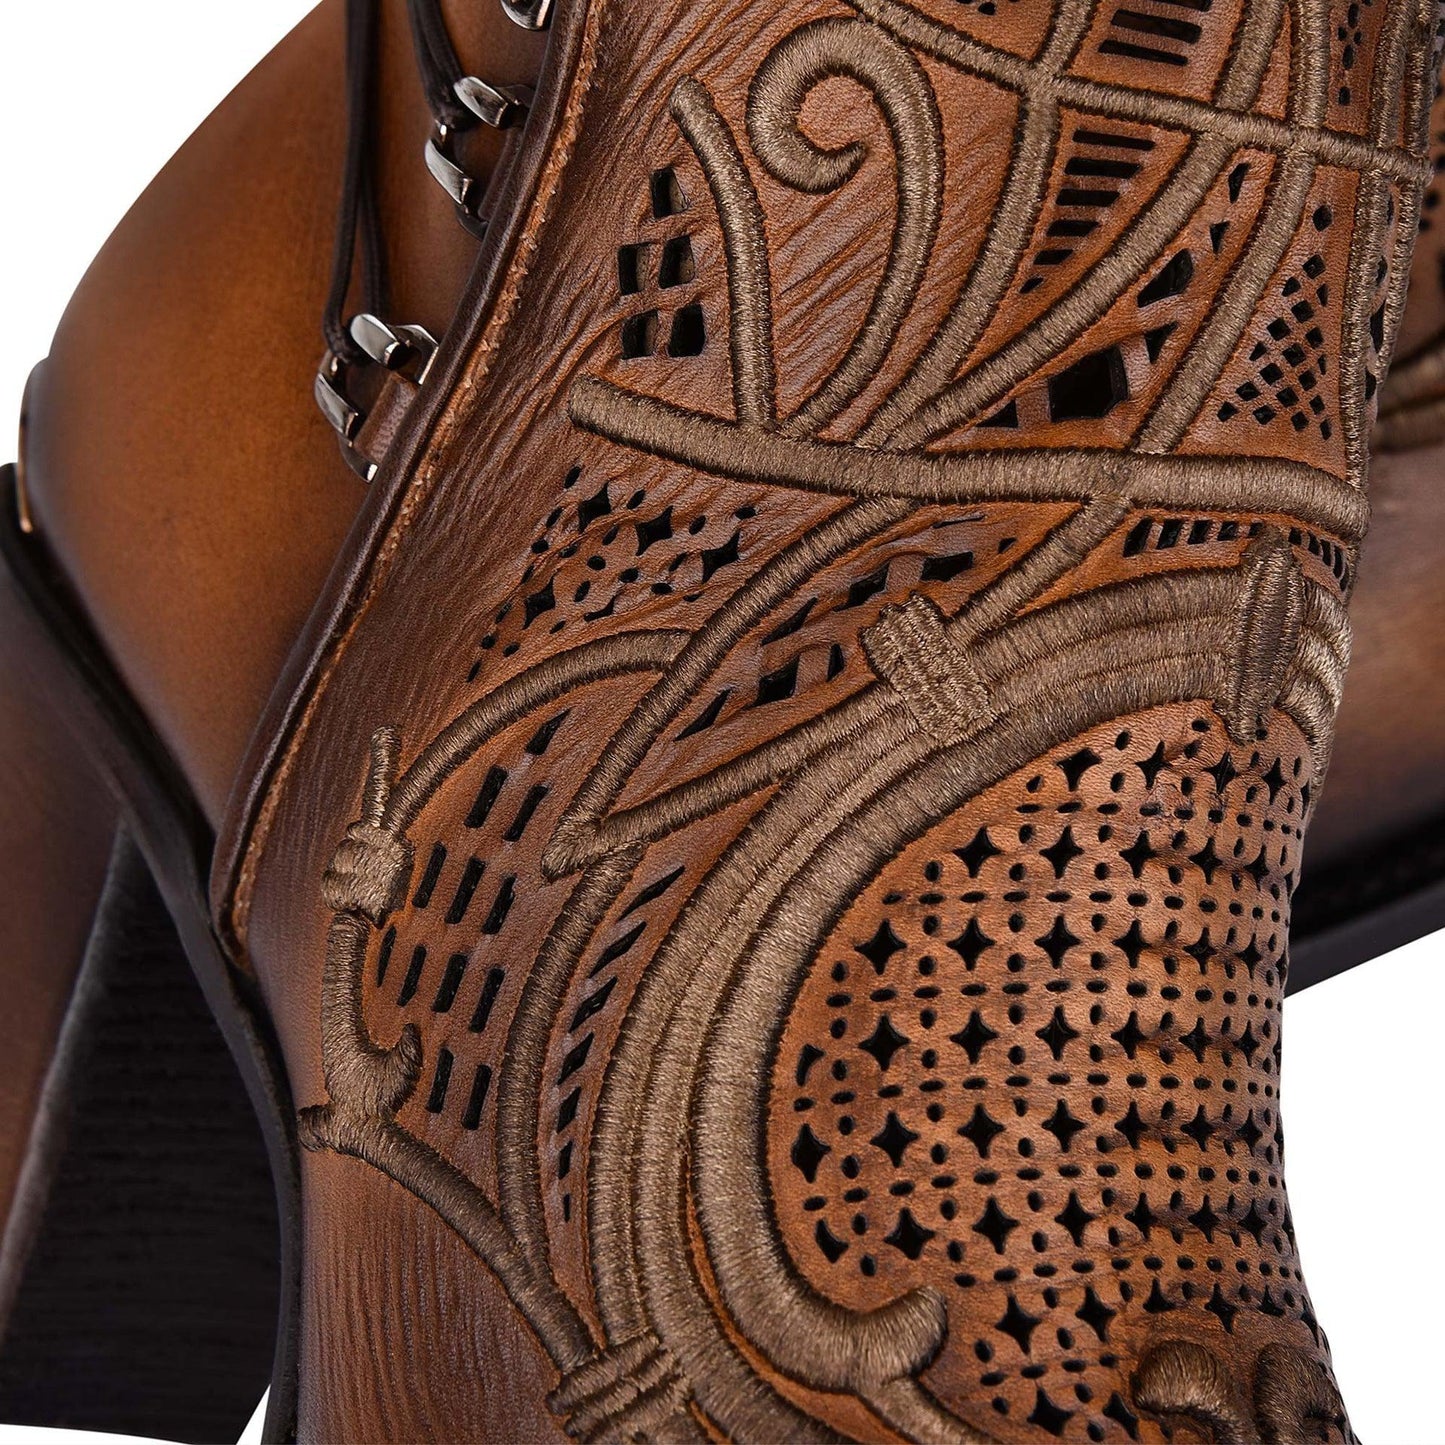 3F48RS - Cuadra brown western cowgirl cowhide leather ankle boots women-Kuet.us